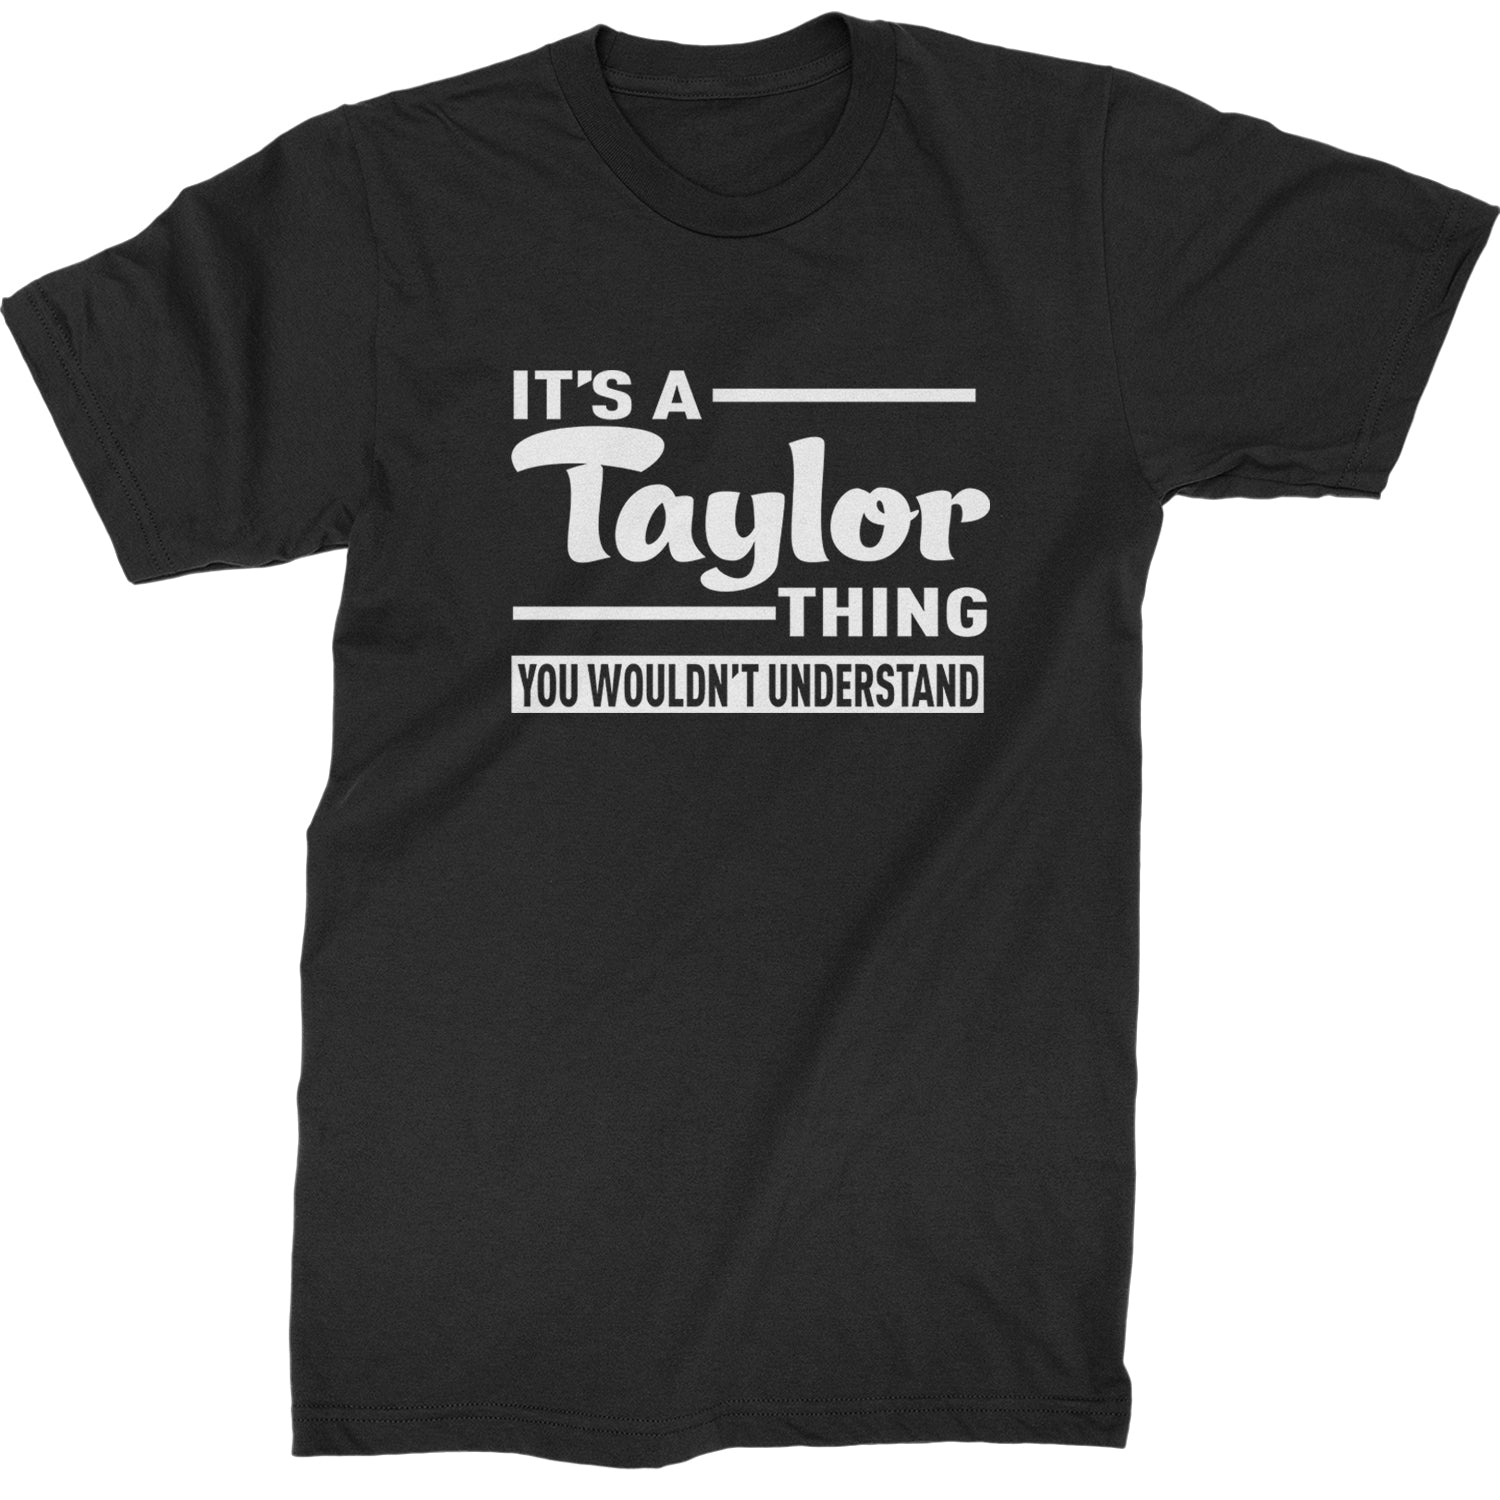 It's A Taylor Thing, You Wouldn't Understand TTPD Mens T-shirt